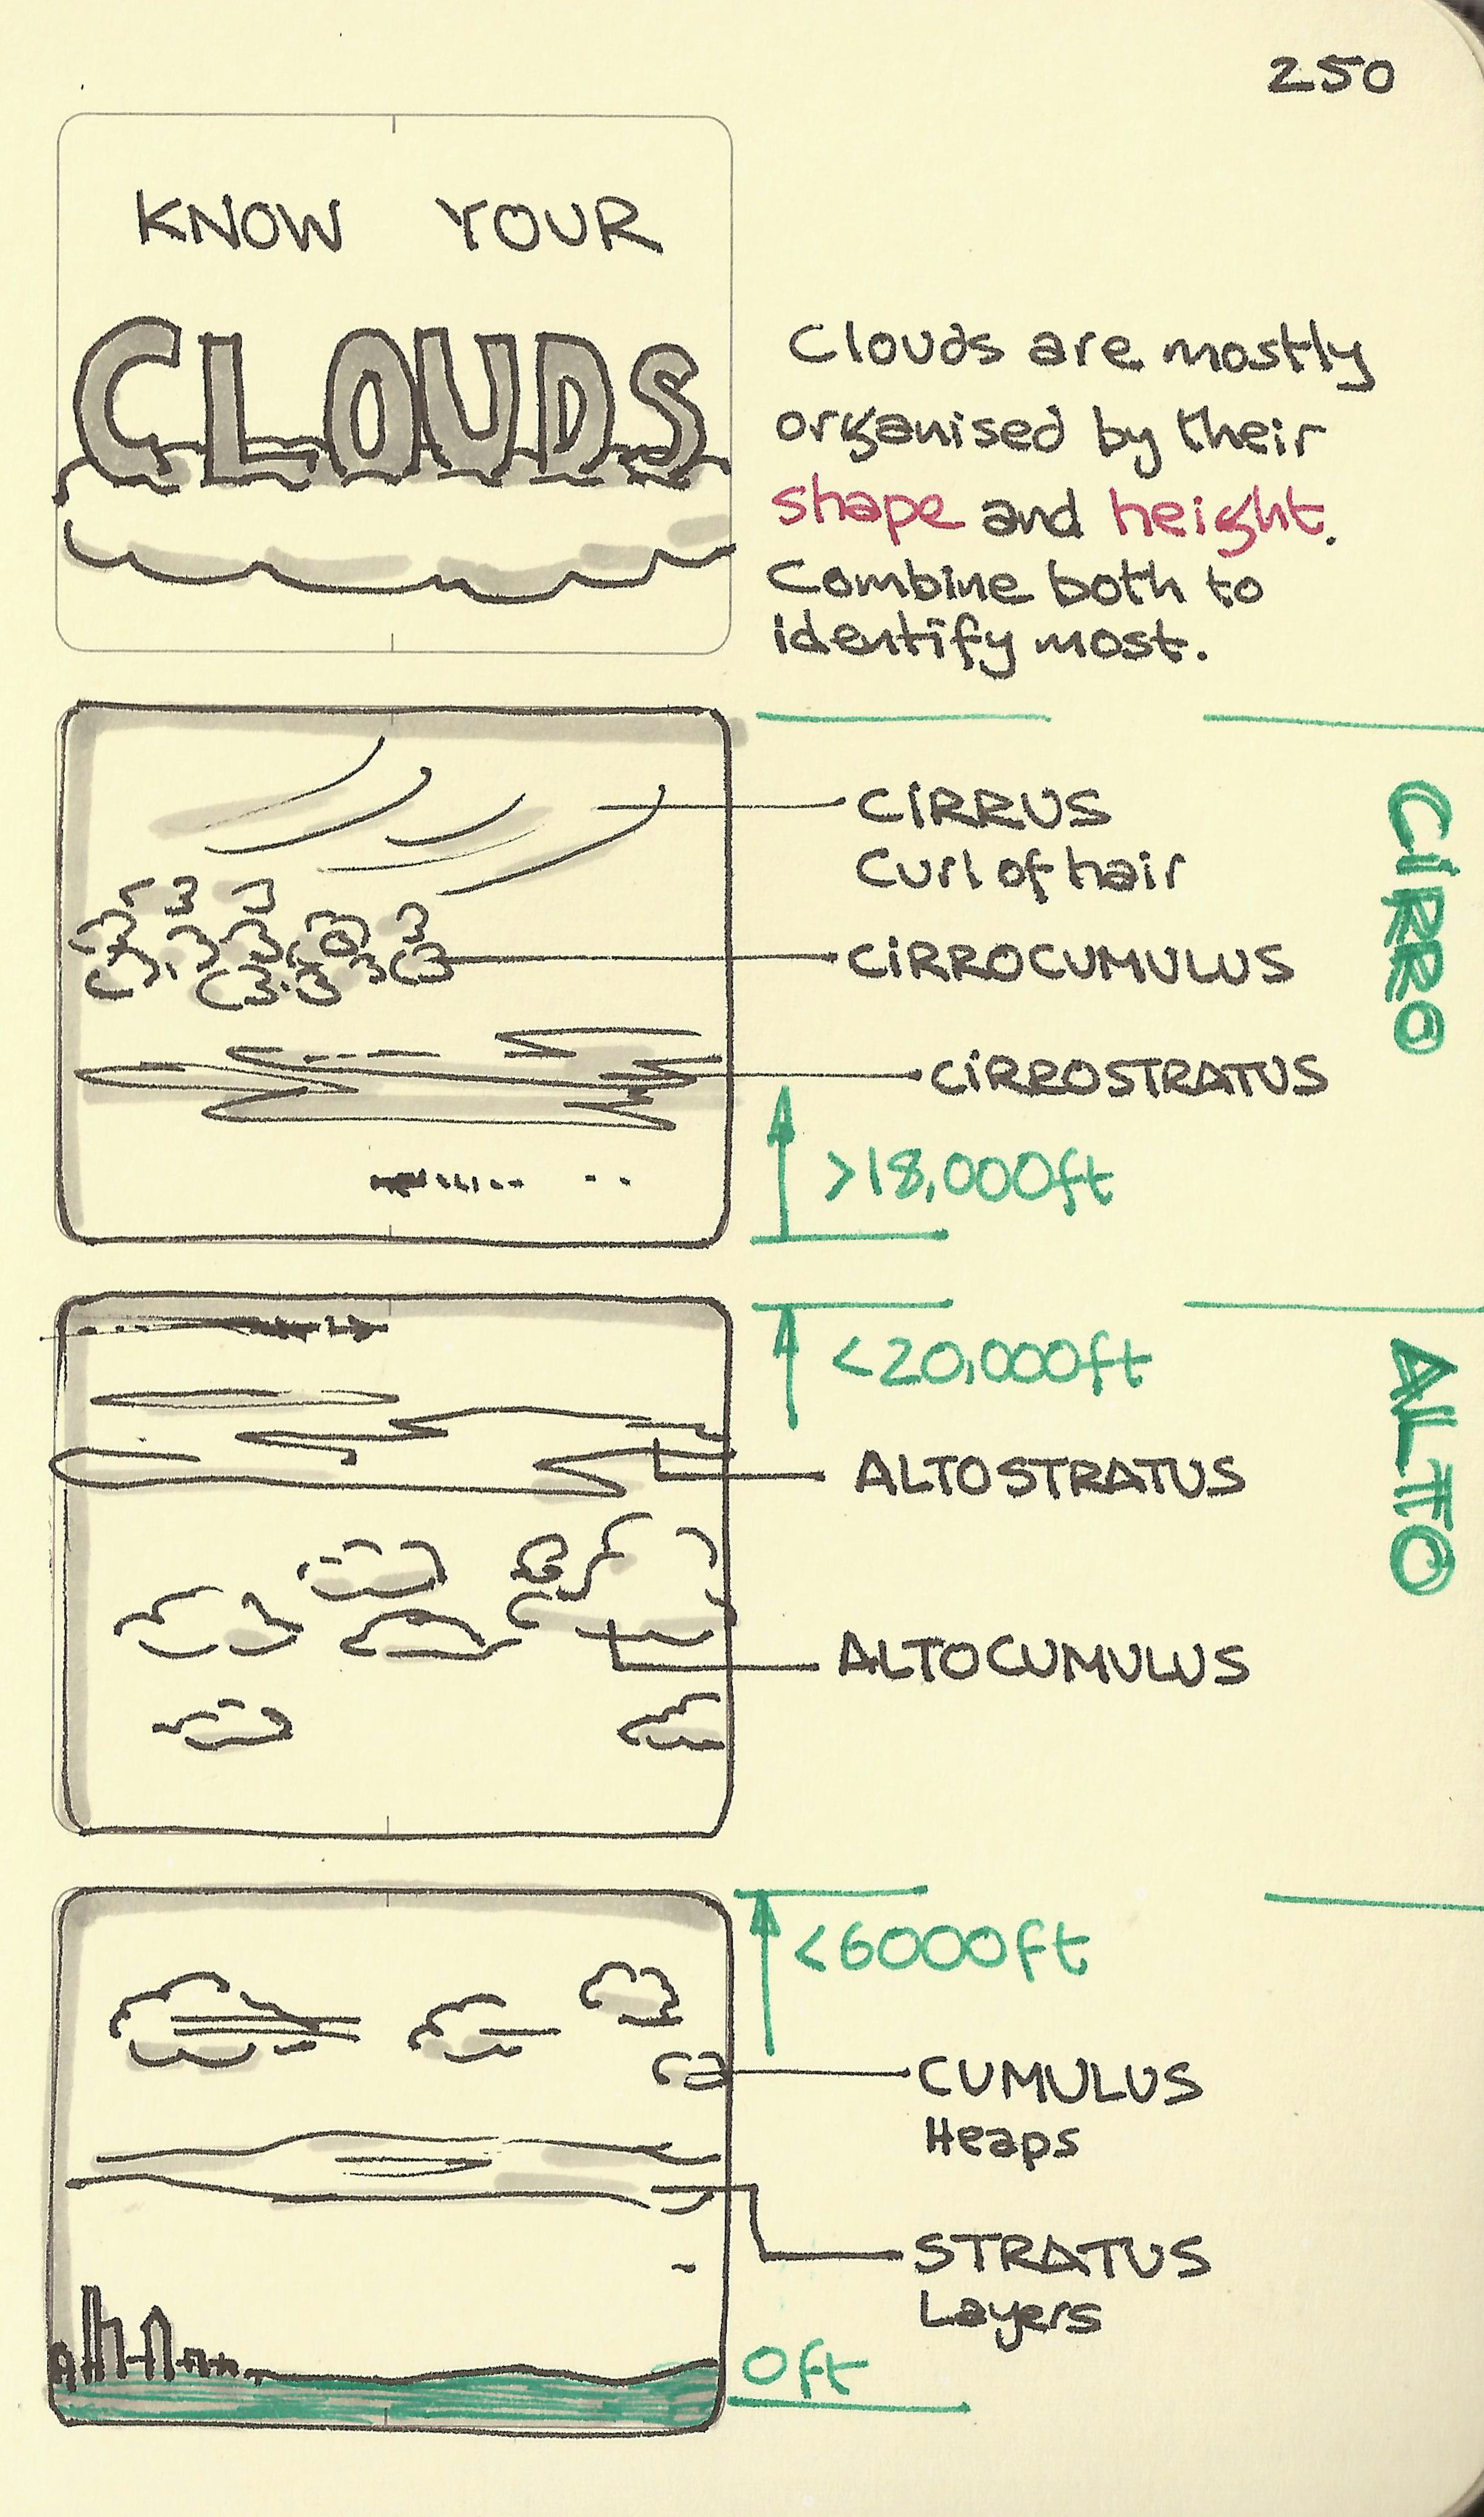 Know your clouds - Sketchplanations